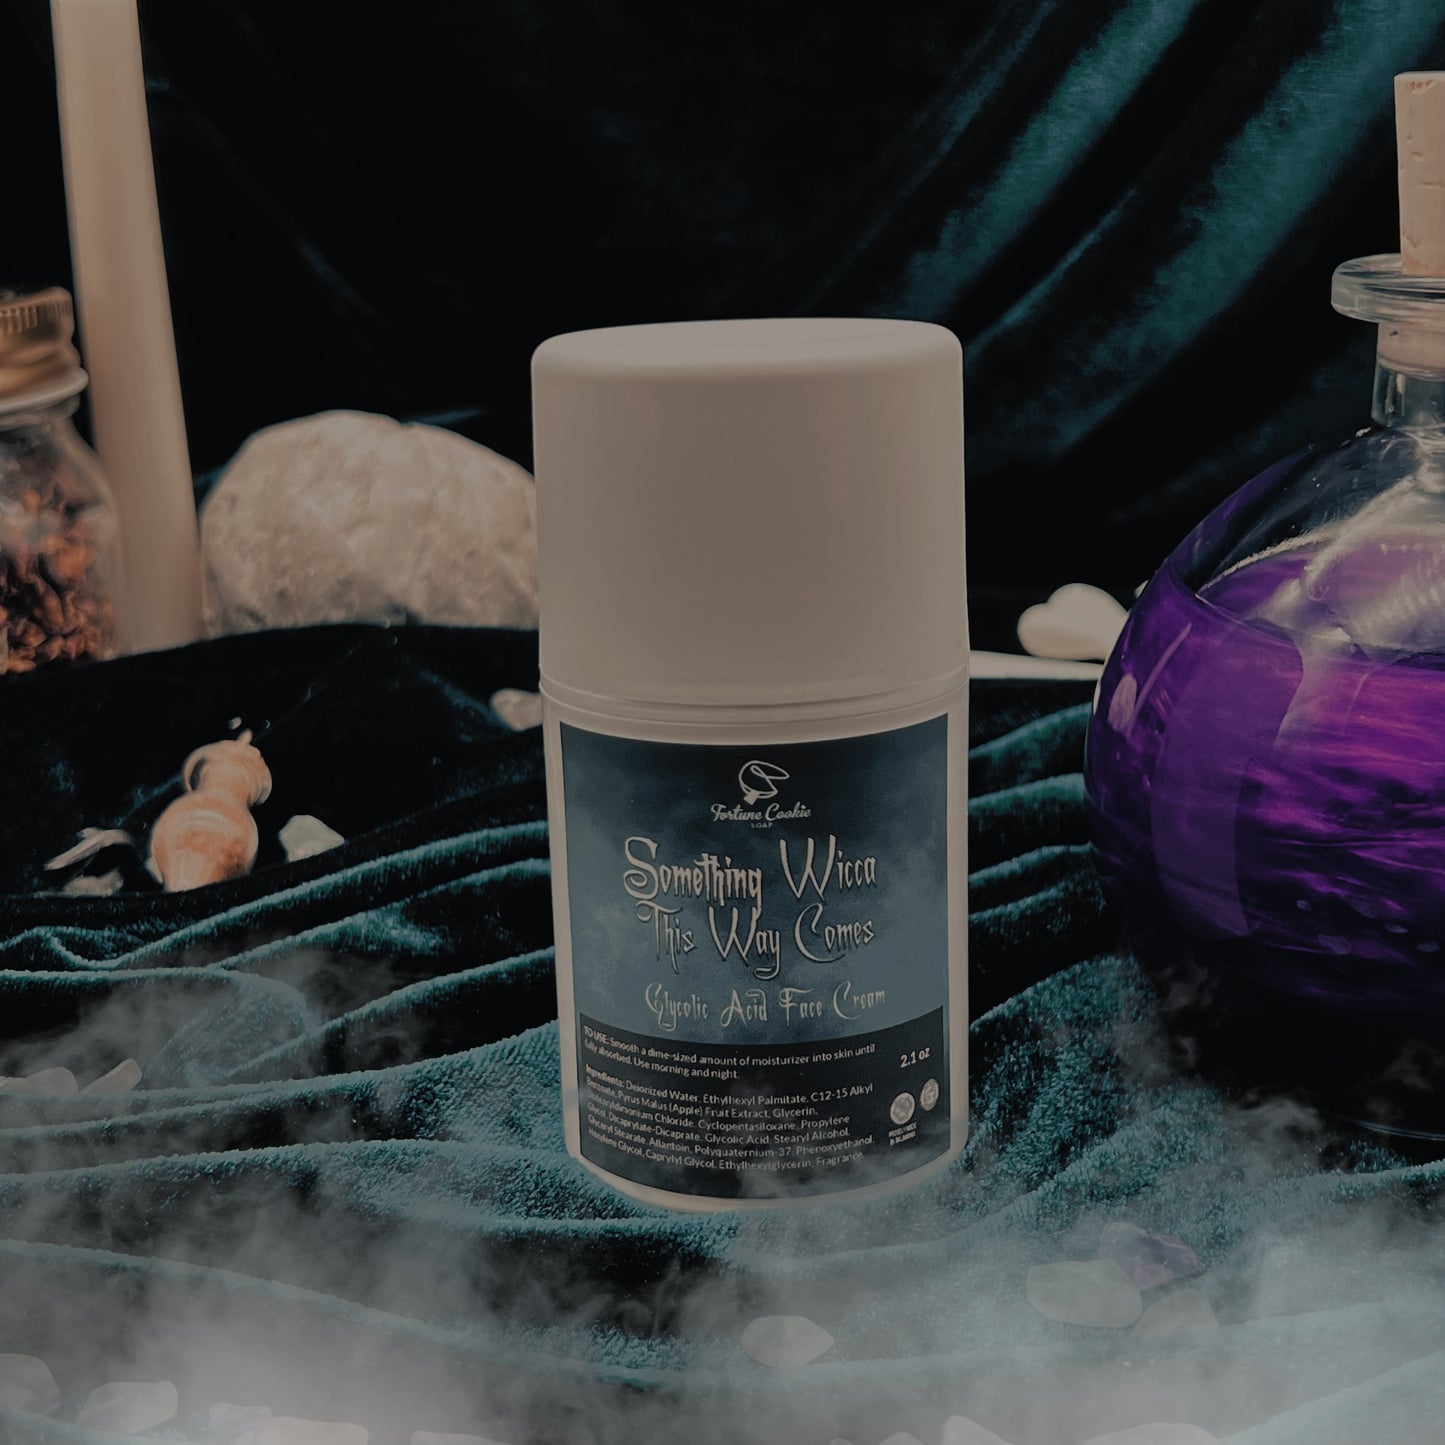 SOMETHING WICCA THIS WAY COMES Glycolic Acid Facial Moisturizer